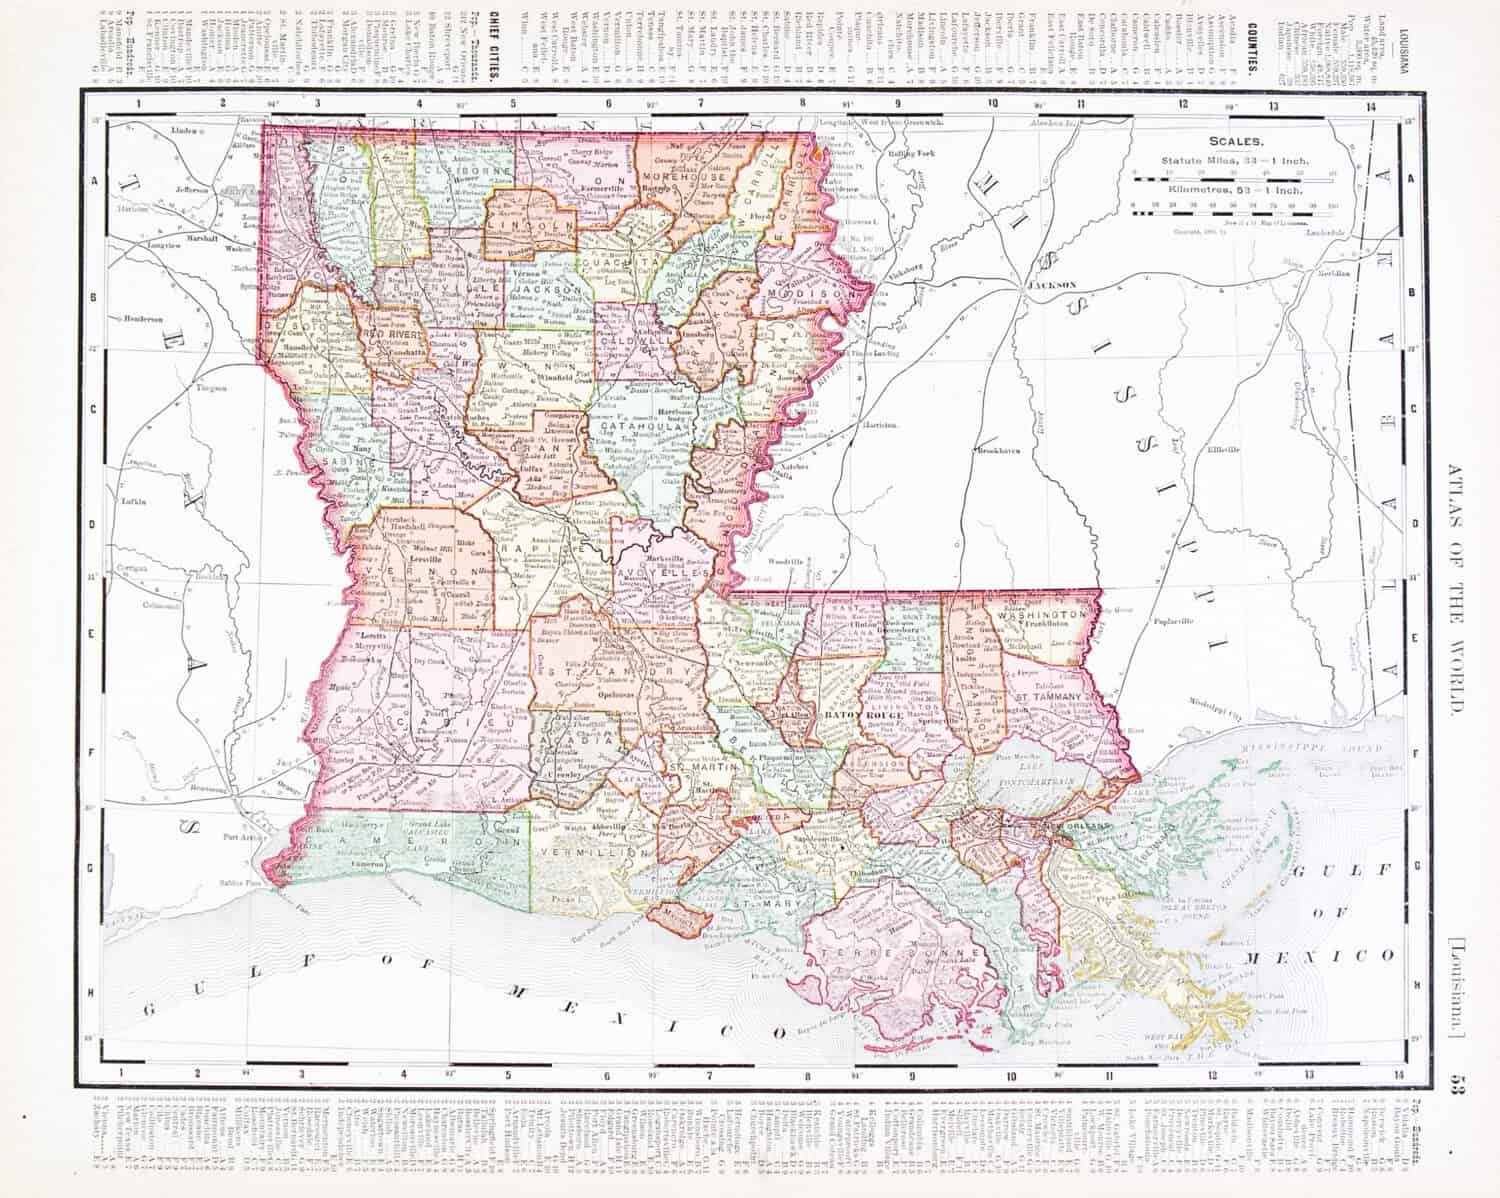 A map of Louisiana, USA from Spofford's Atlas of the World, printed in the United States in 1900, created by Rand McNally & Co.